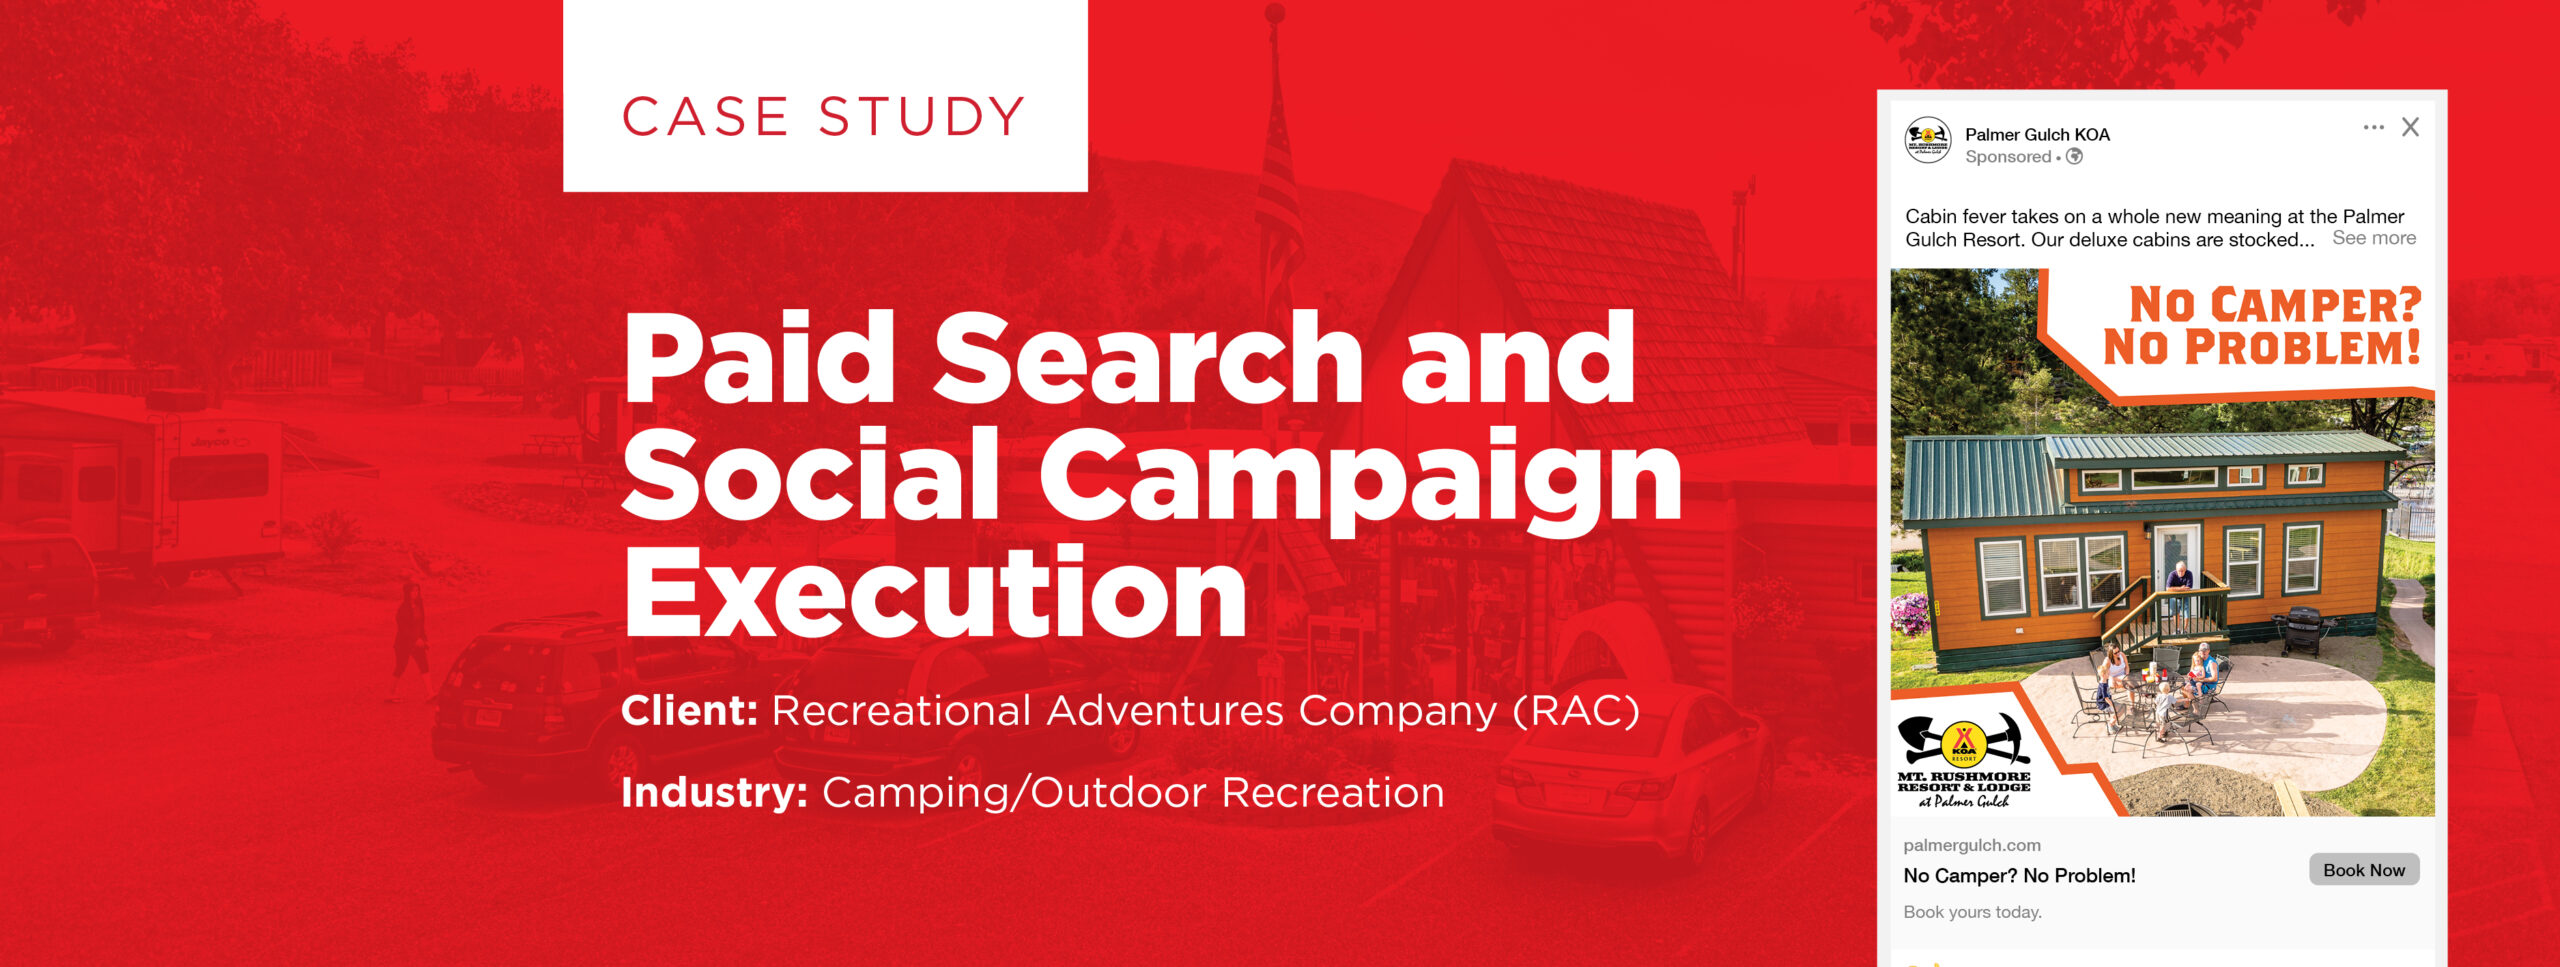 Paid search and social campaign execution